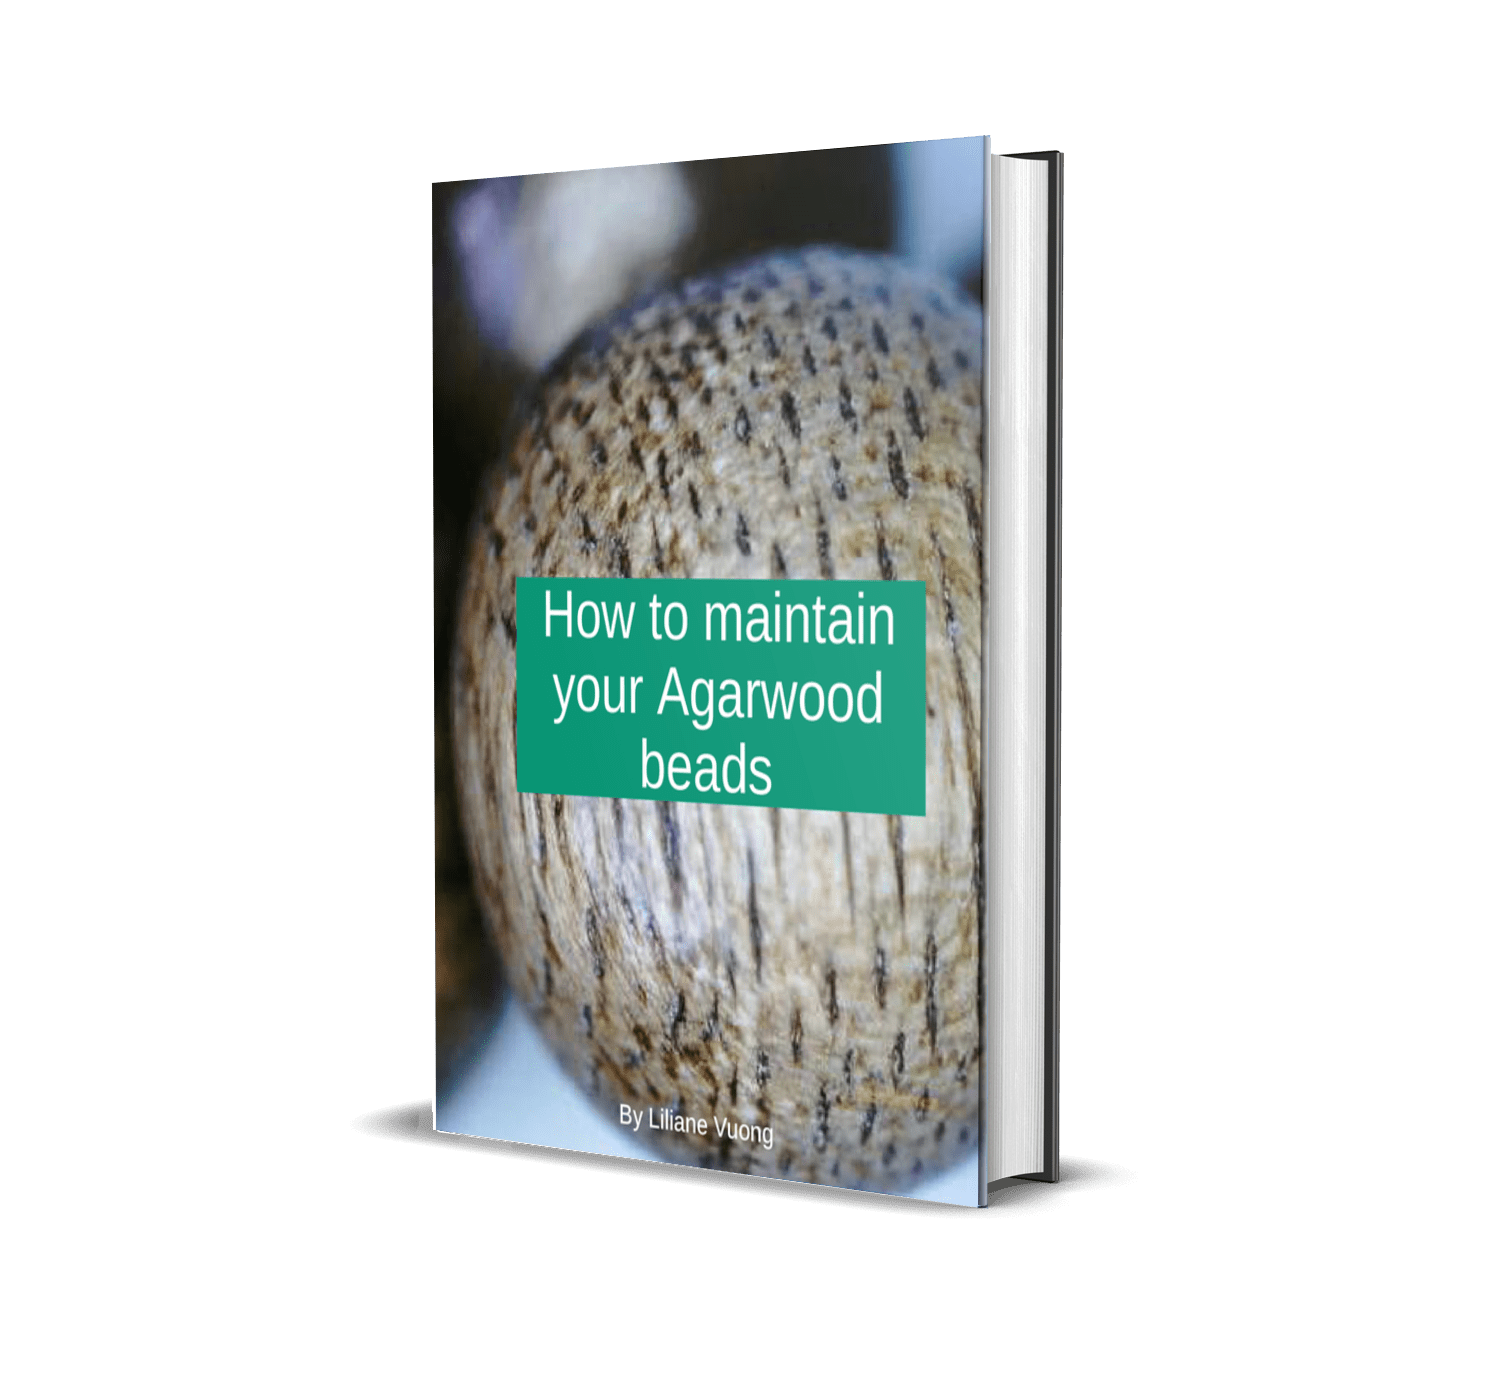 FREE eBooks- Introduction to Agarwood - Instant download - How to maintain Agarwood beads